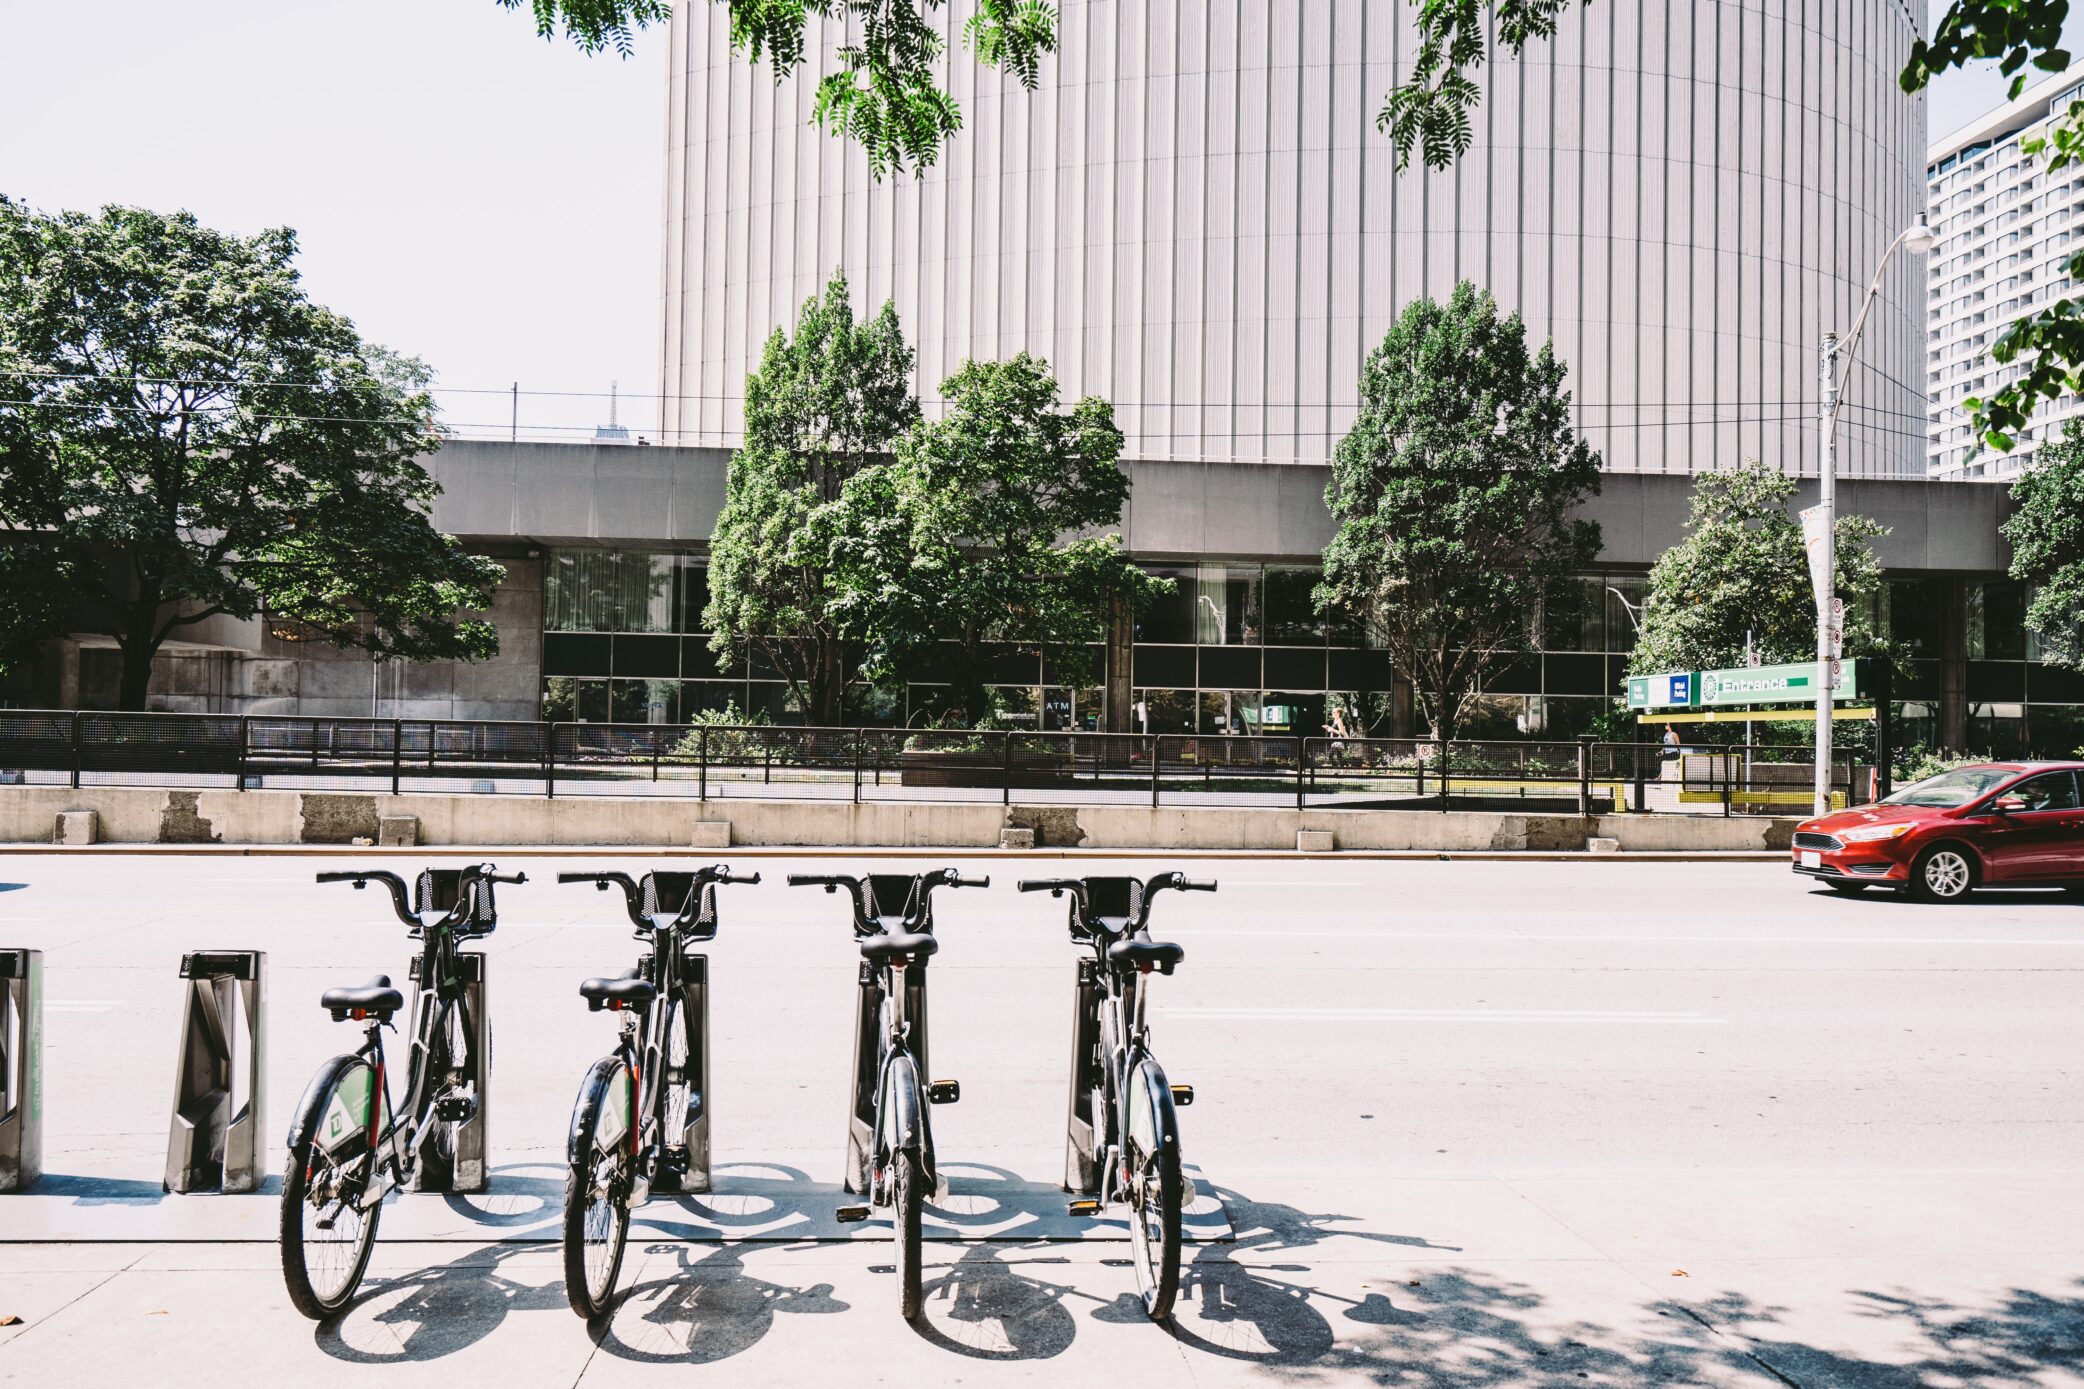 Image of bicycles parked on the side of the street in front of a building.